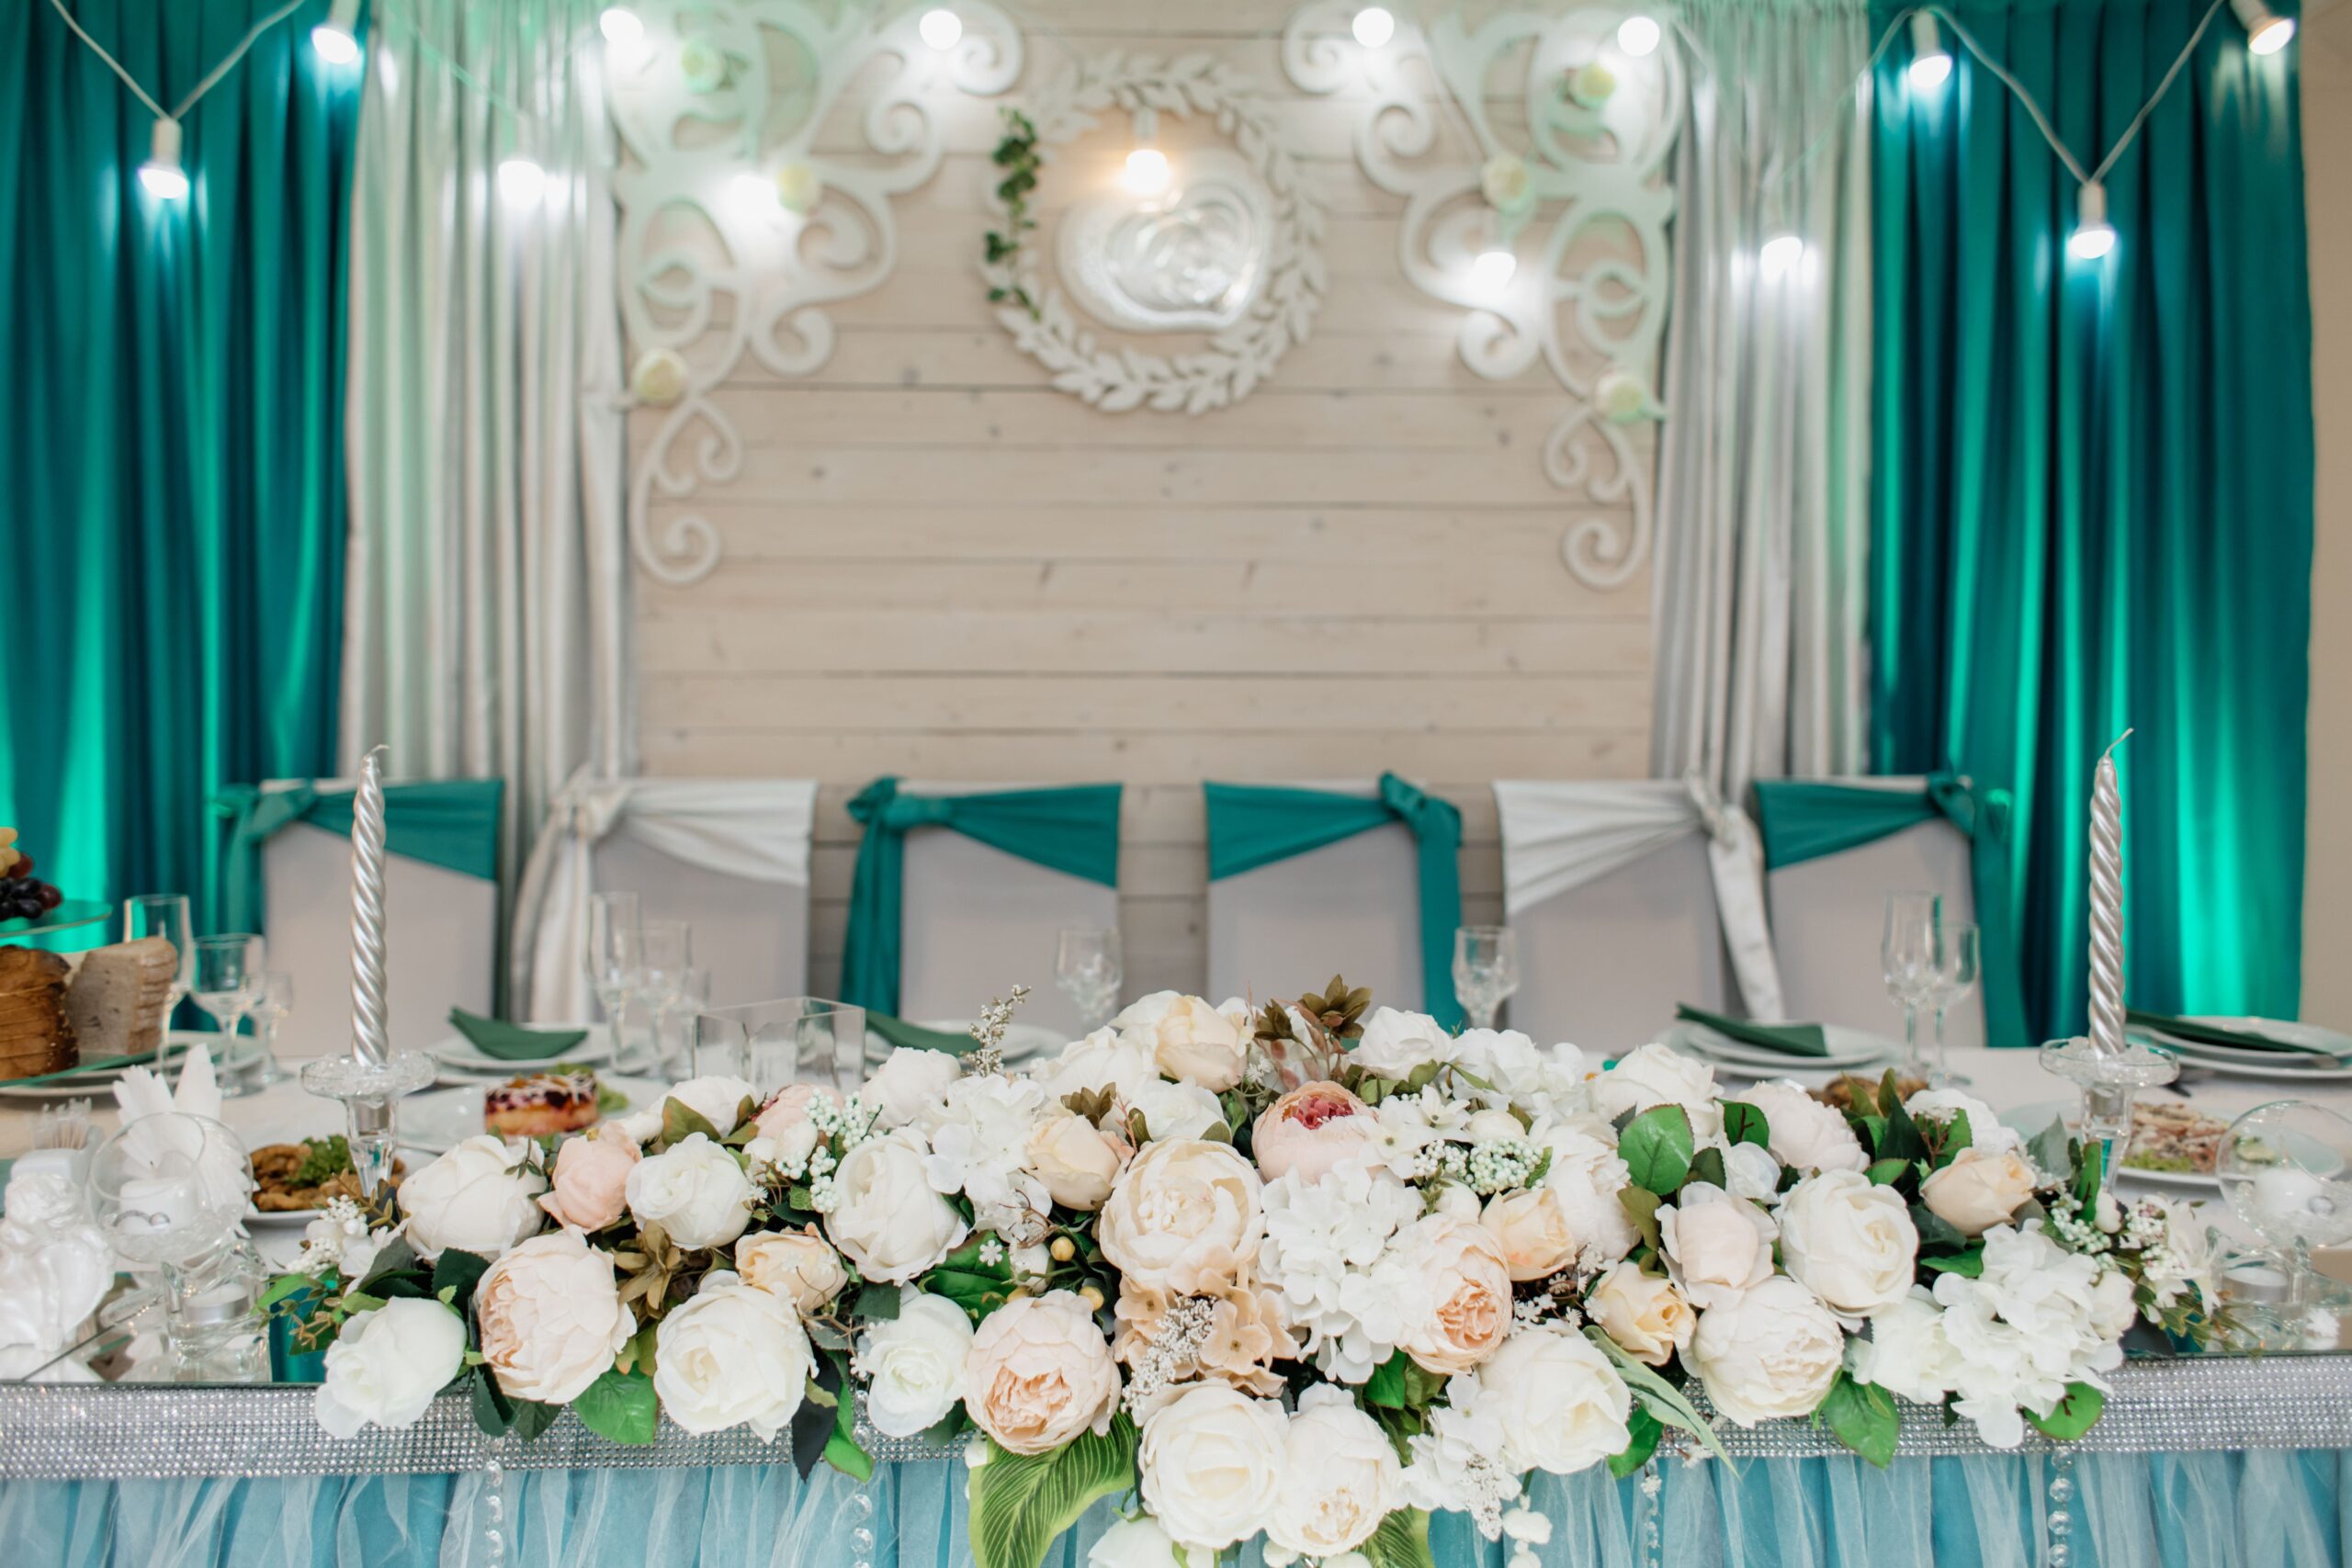 wedding-table-groom-bride-decorated-with-floral-composition-made-white-roses-aquamarine-tones